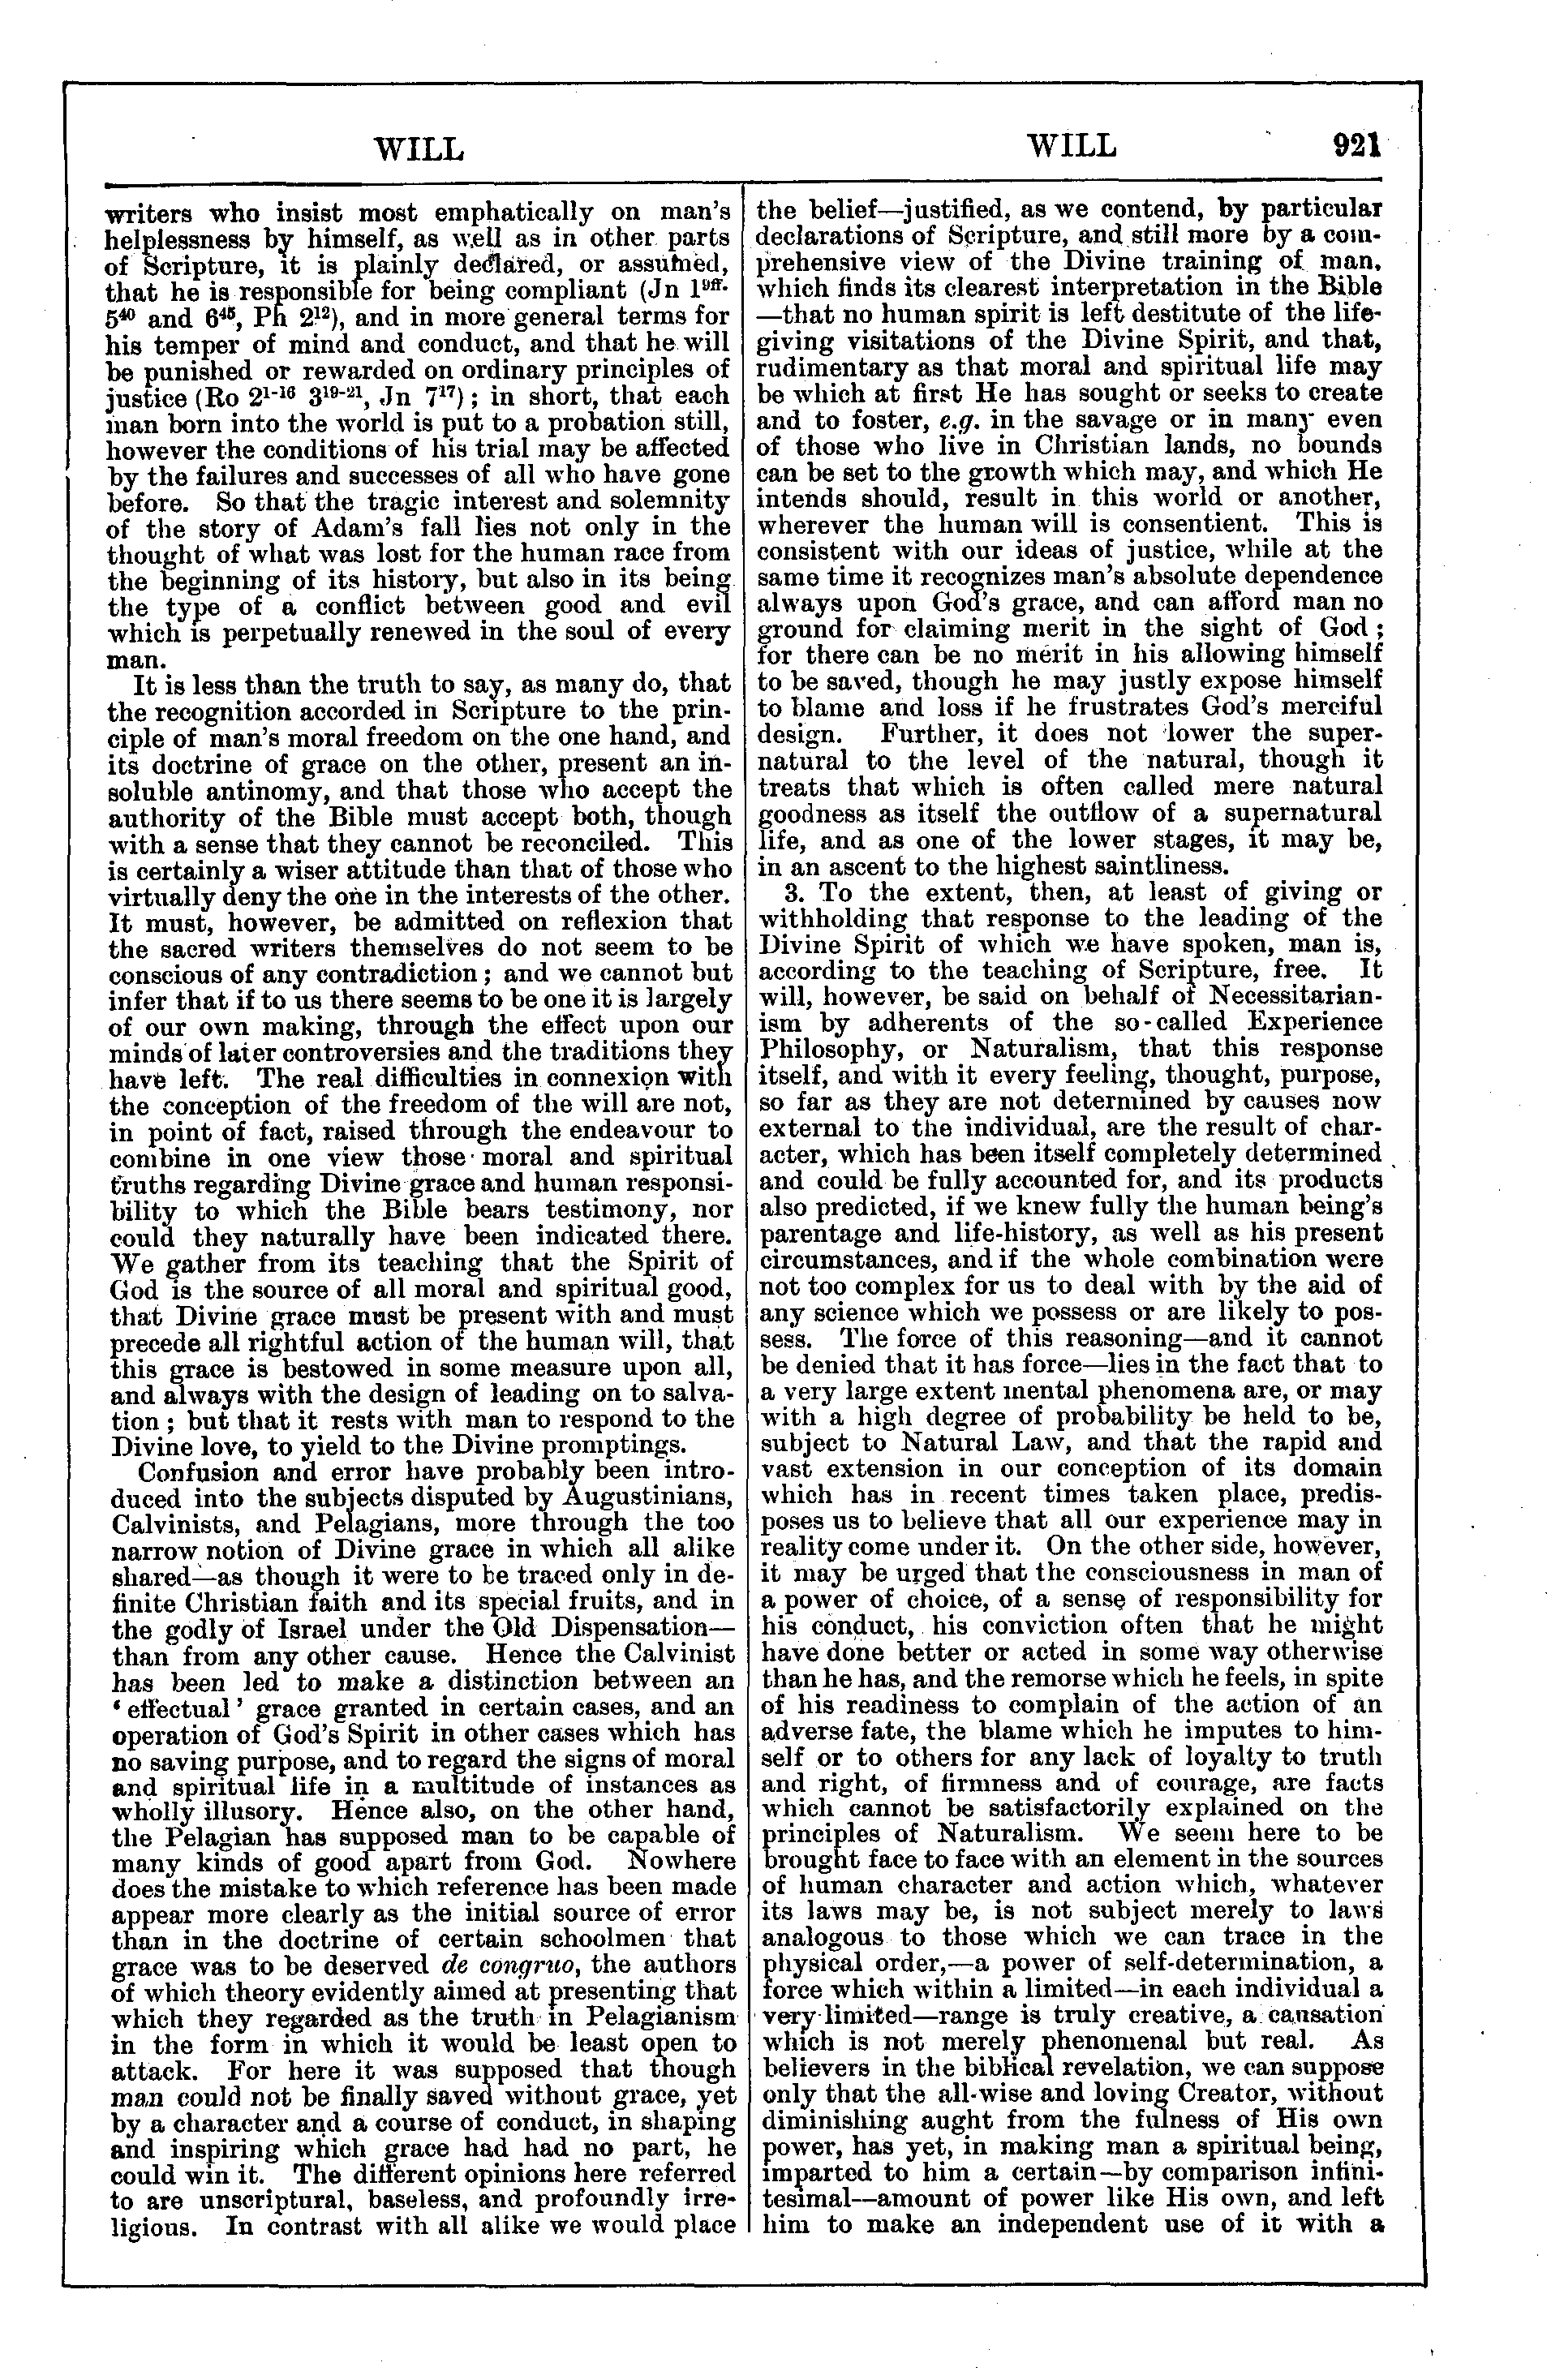 Image of page 921